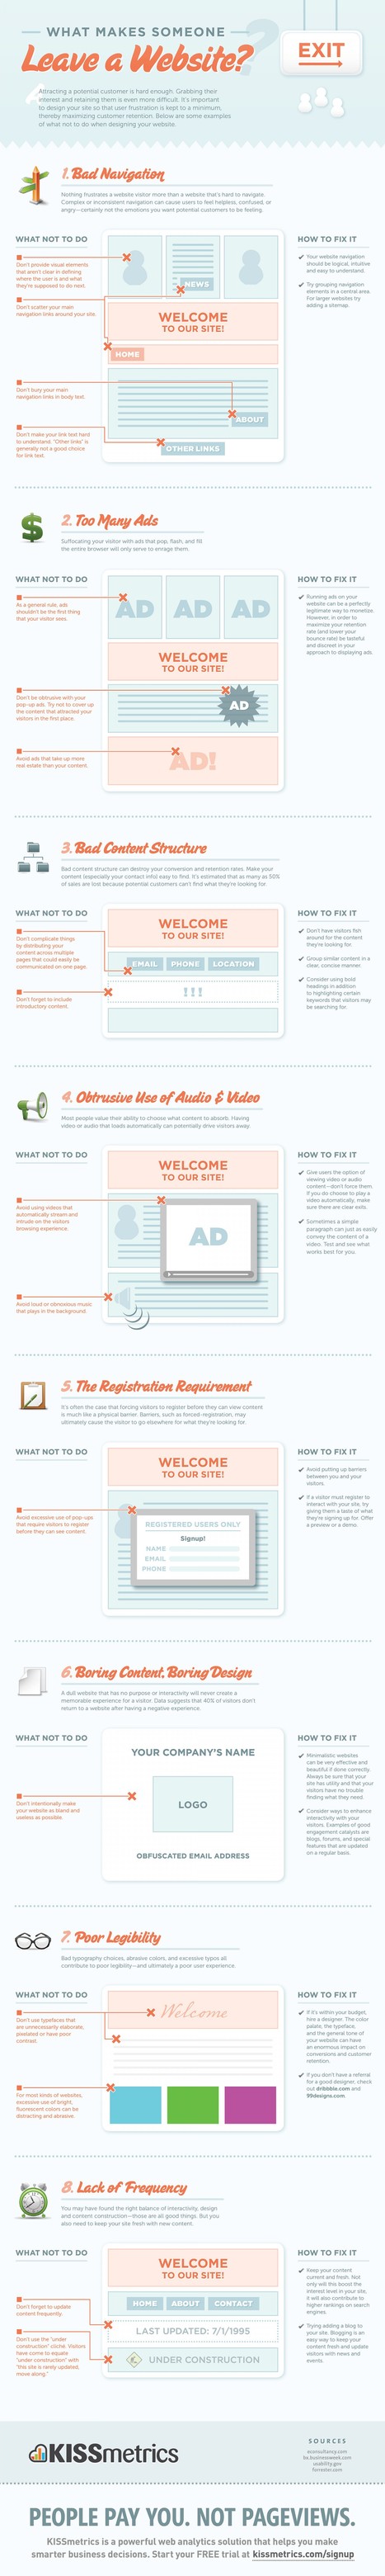 Avoid These 8 Deadly Sins of Site Design | Infographic | Rapid eLearning | Scoop.it